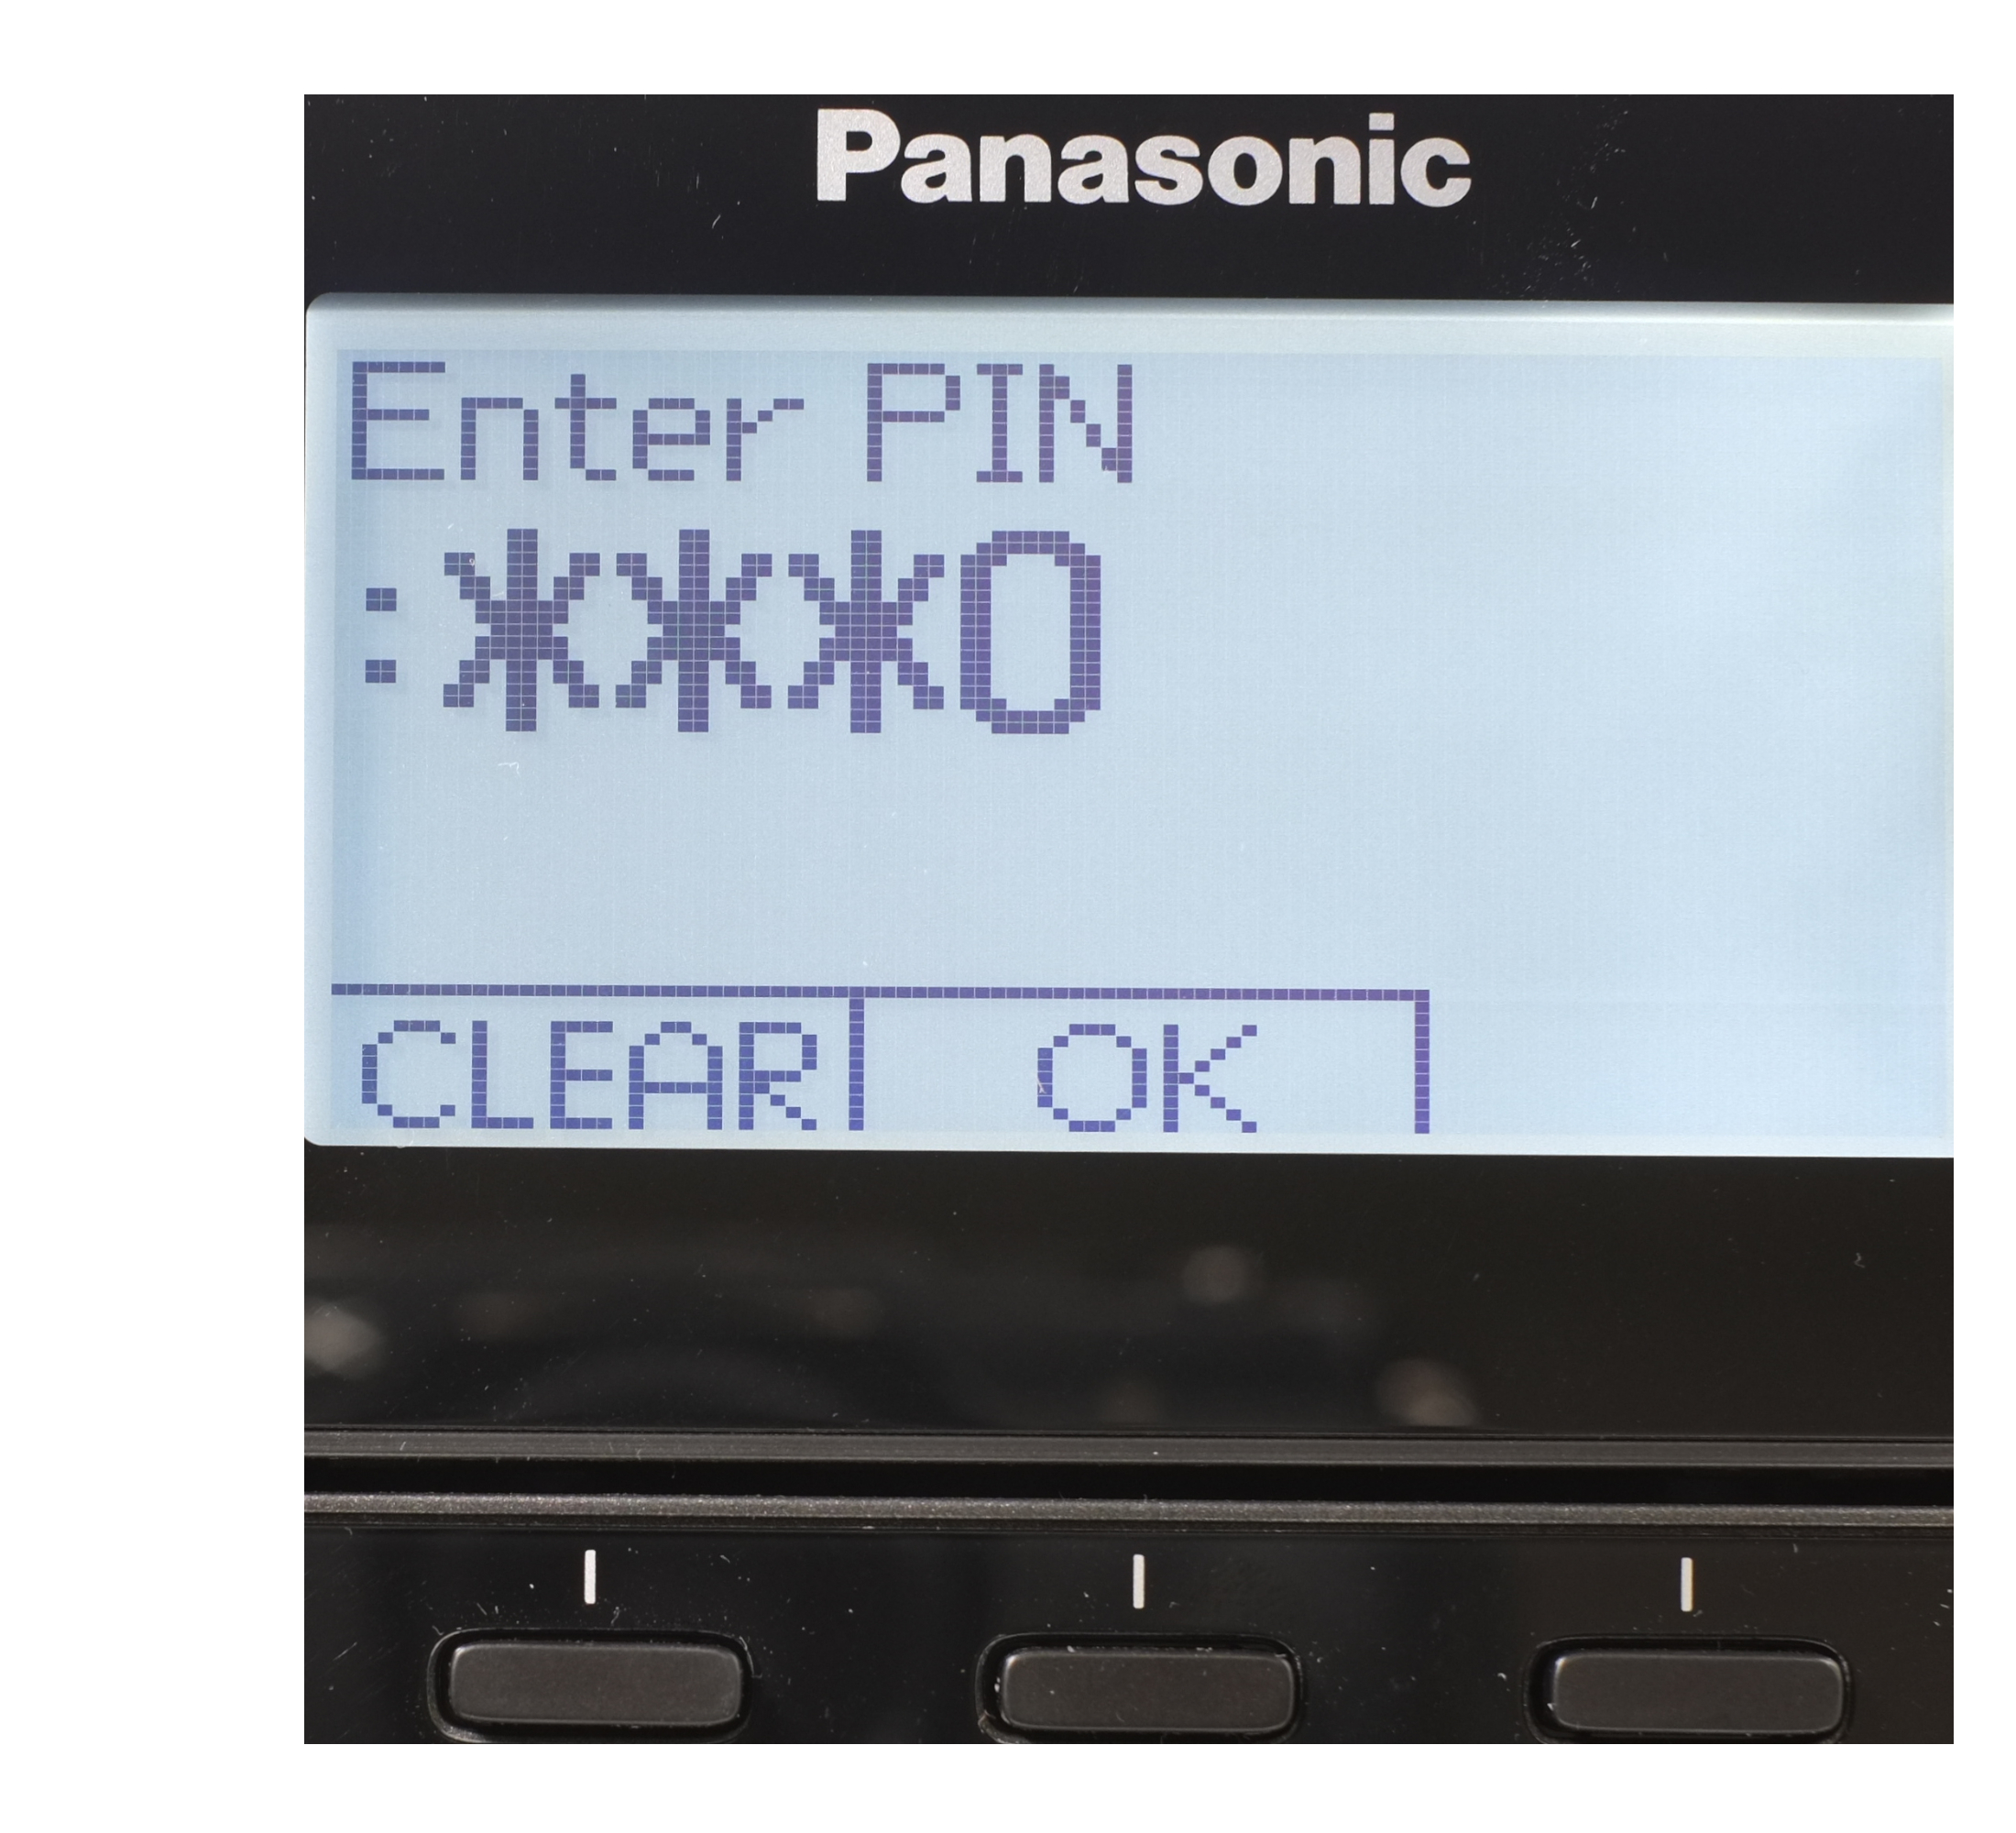 Enter Bluetooth pin number for Panasonic phone